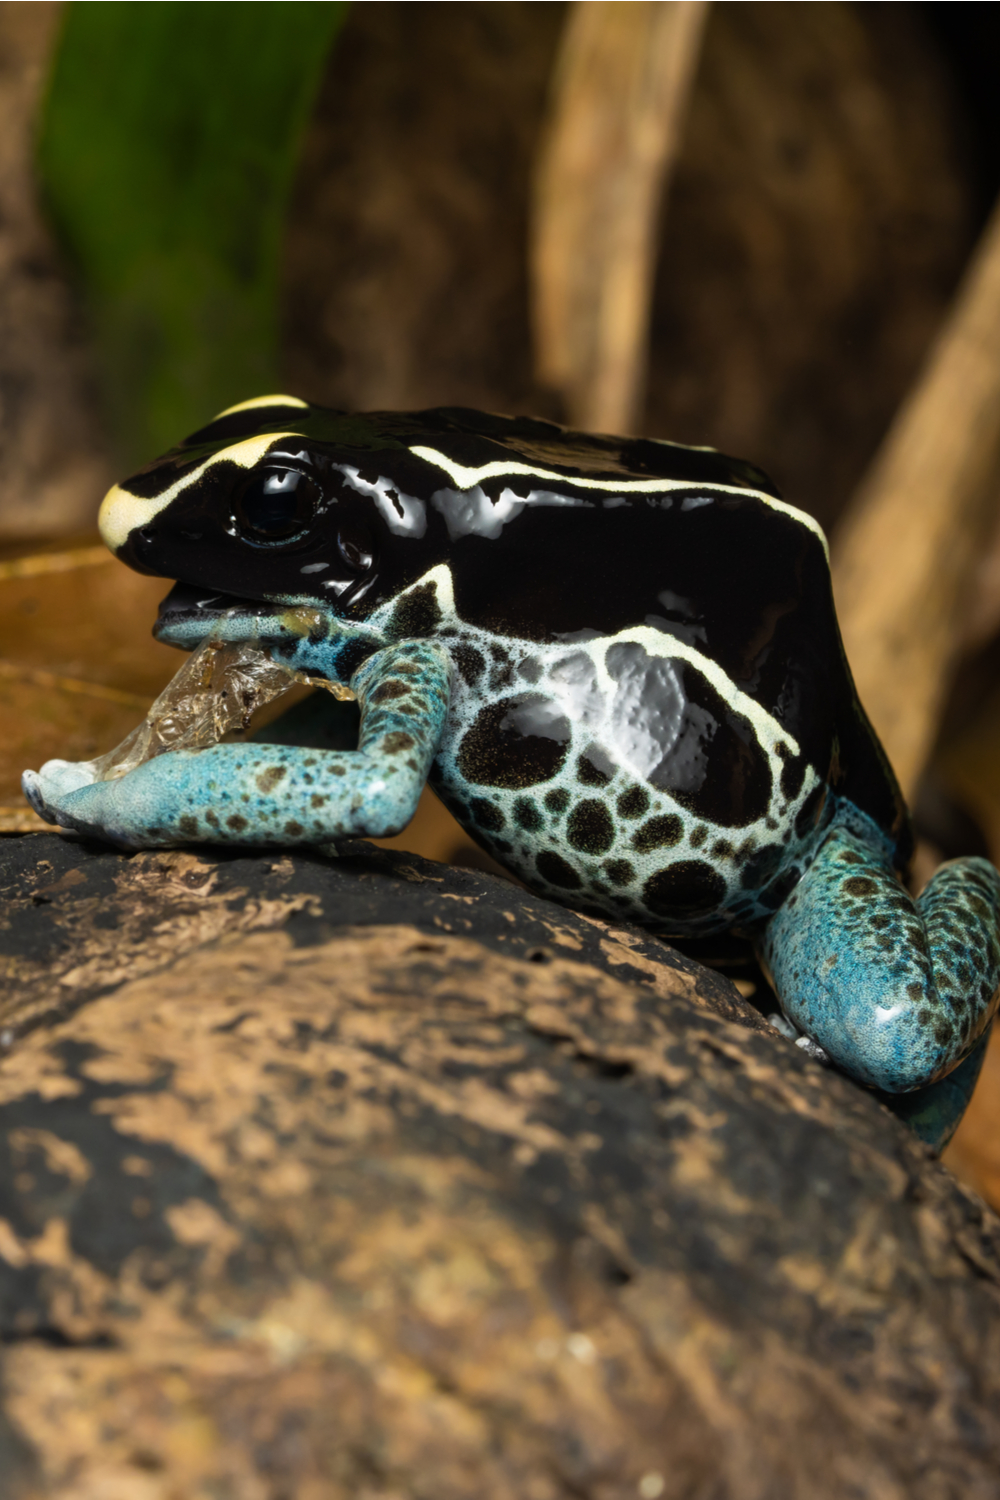 What do poison dart frogs eat in the wild